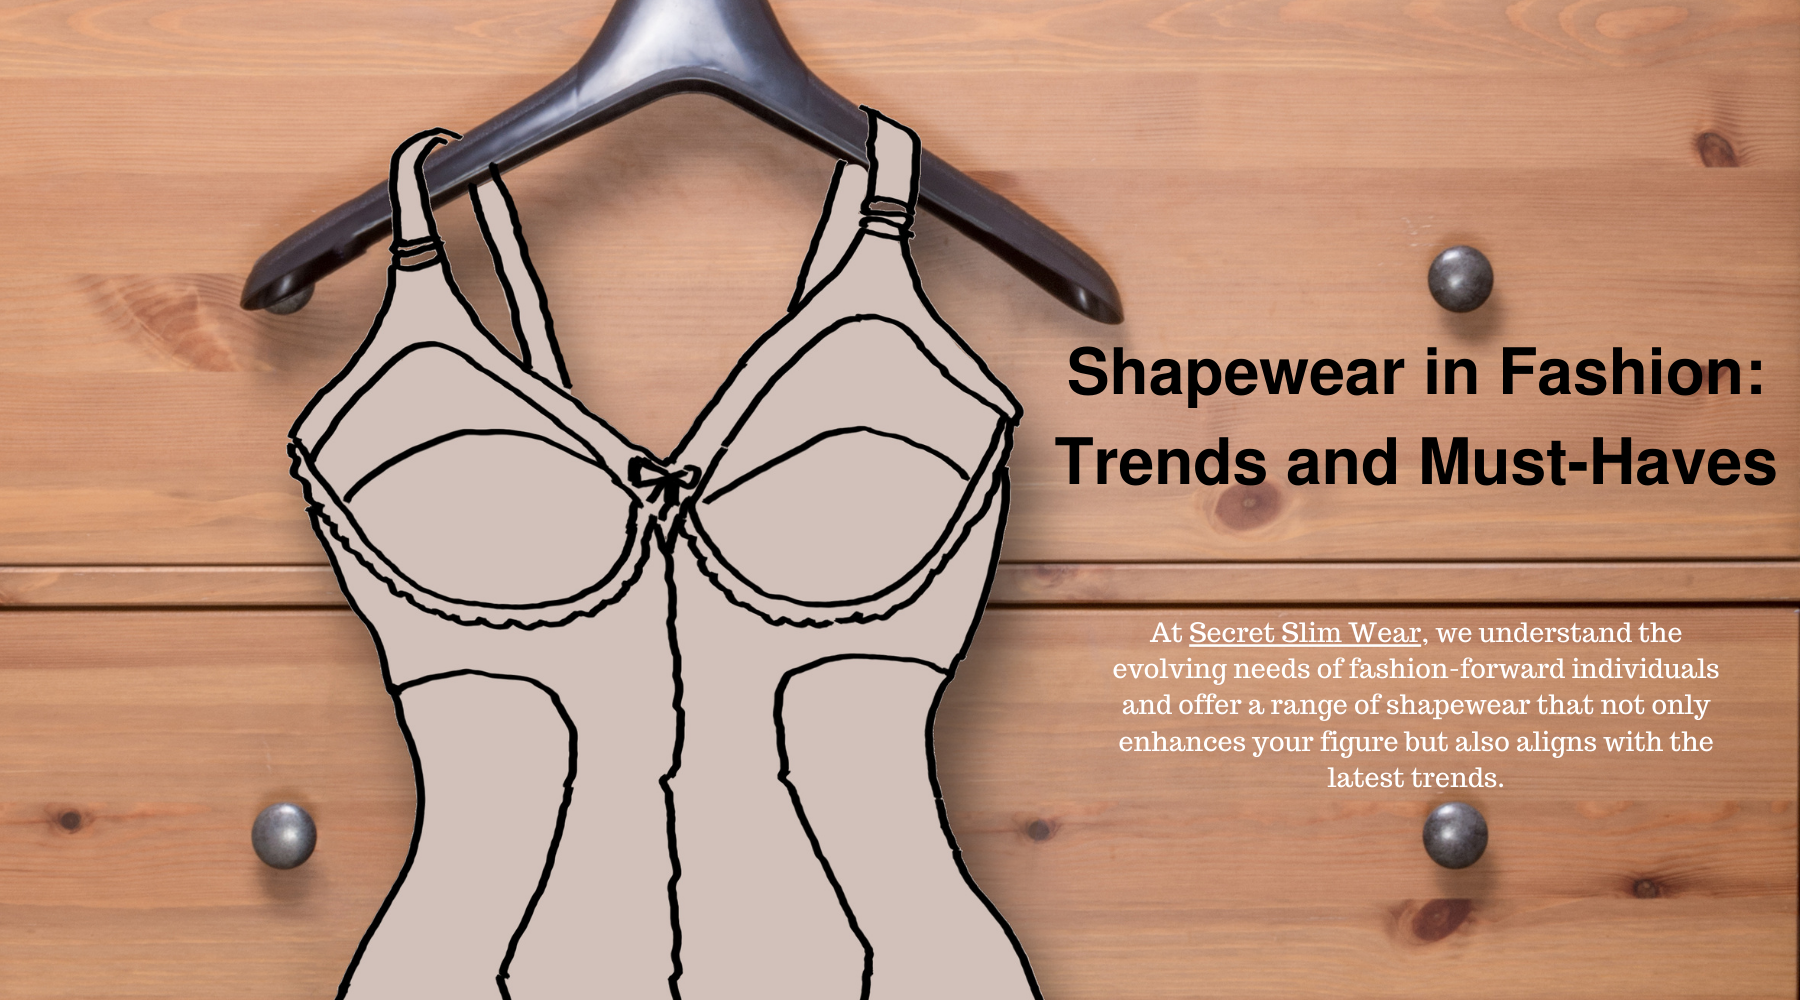 Shapewear in Fashion: Trends and Must-Haves